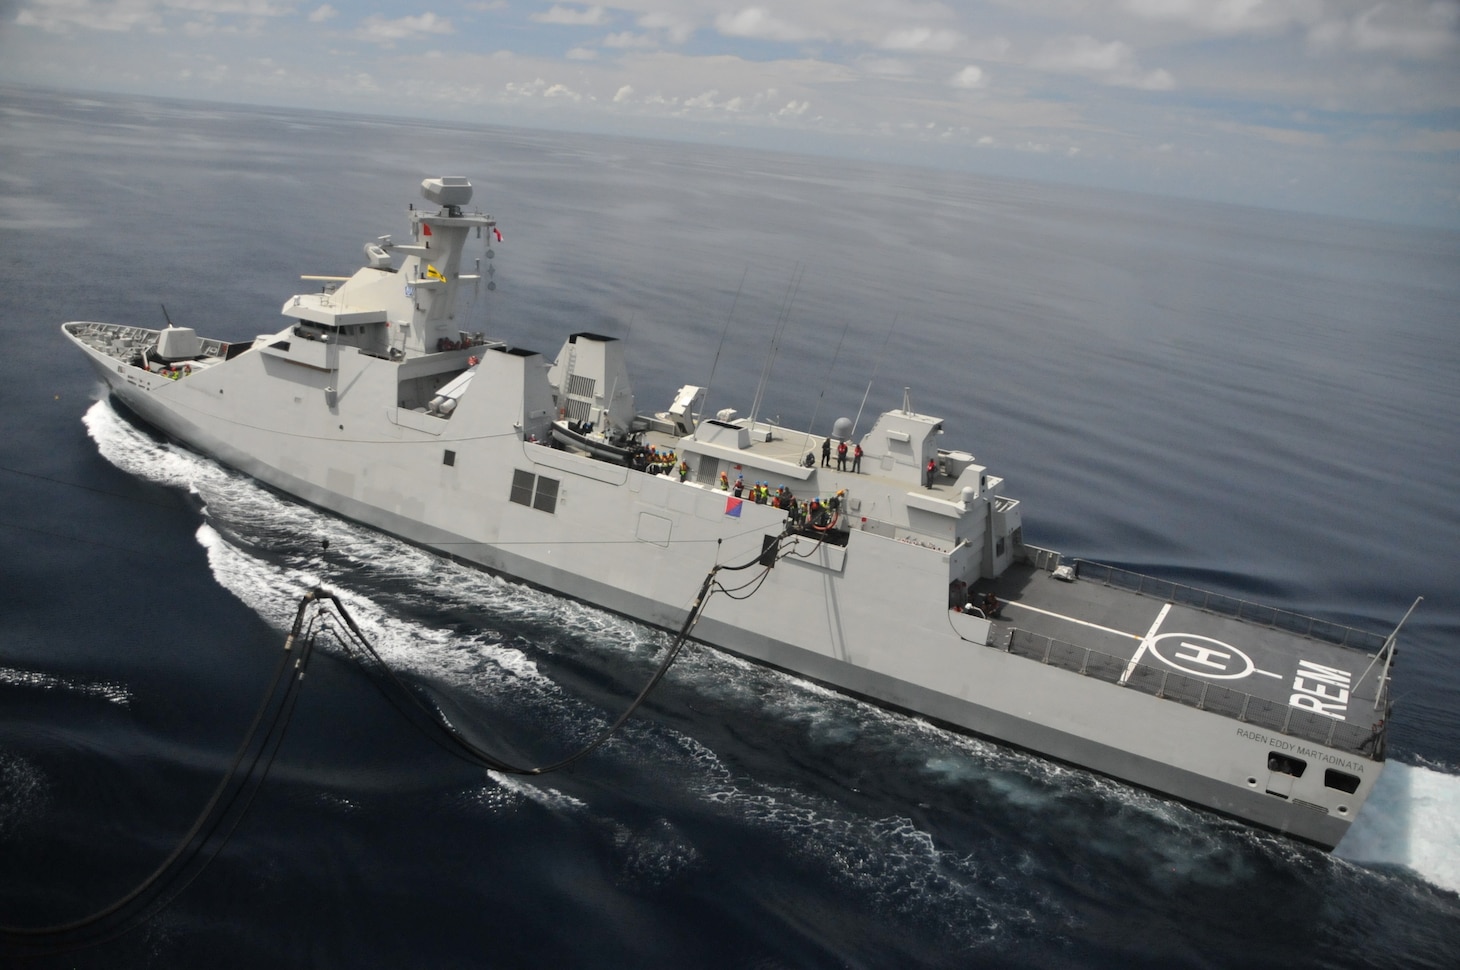 Indonesian Navy frigate KRI Raden Eddy Martadinata (FFG-331) receives fuel from Military Sealift Command’s fleet replenishment oiler USNS Rappahannock (T-AO-204) during an underway replenishment in Indonesian territorial waters in the South China Sea, May 20.